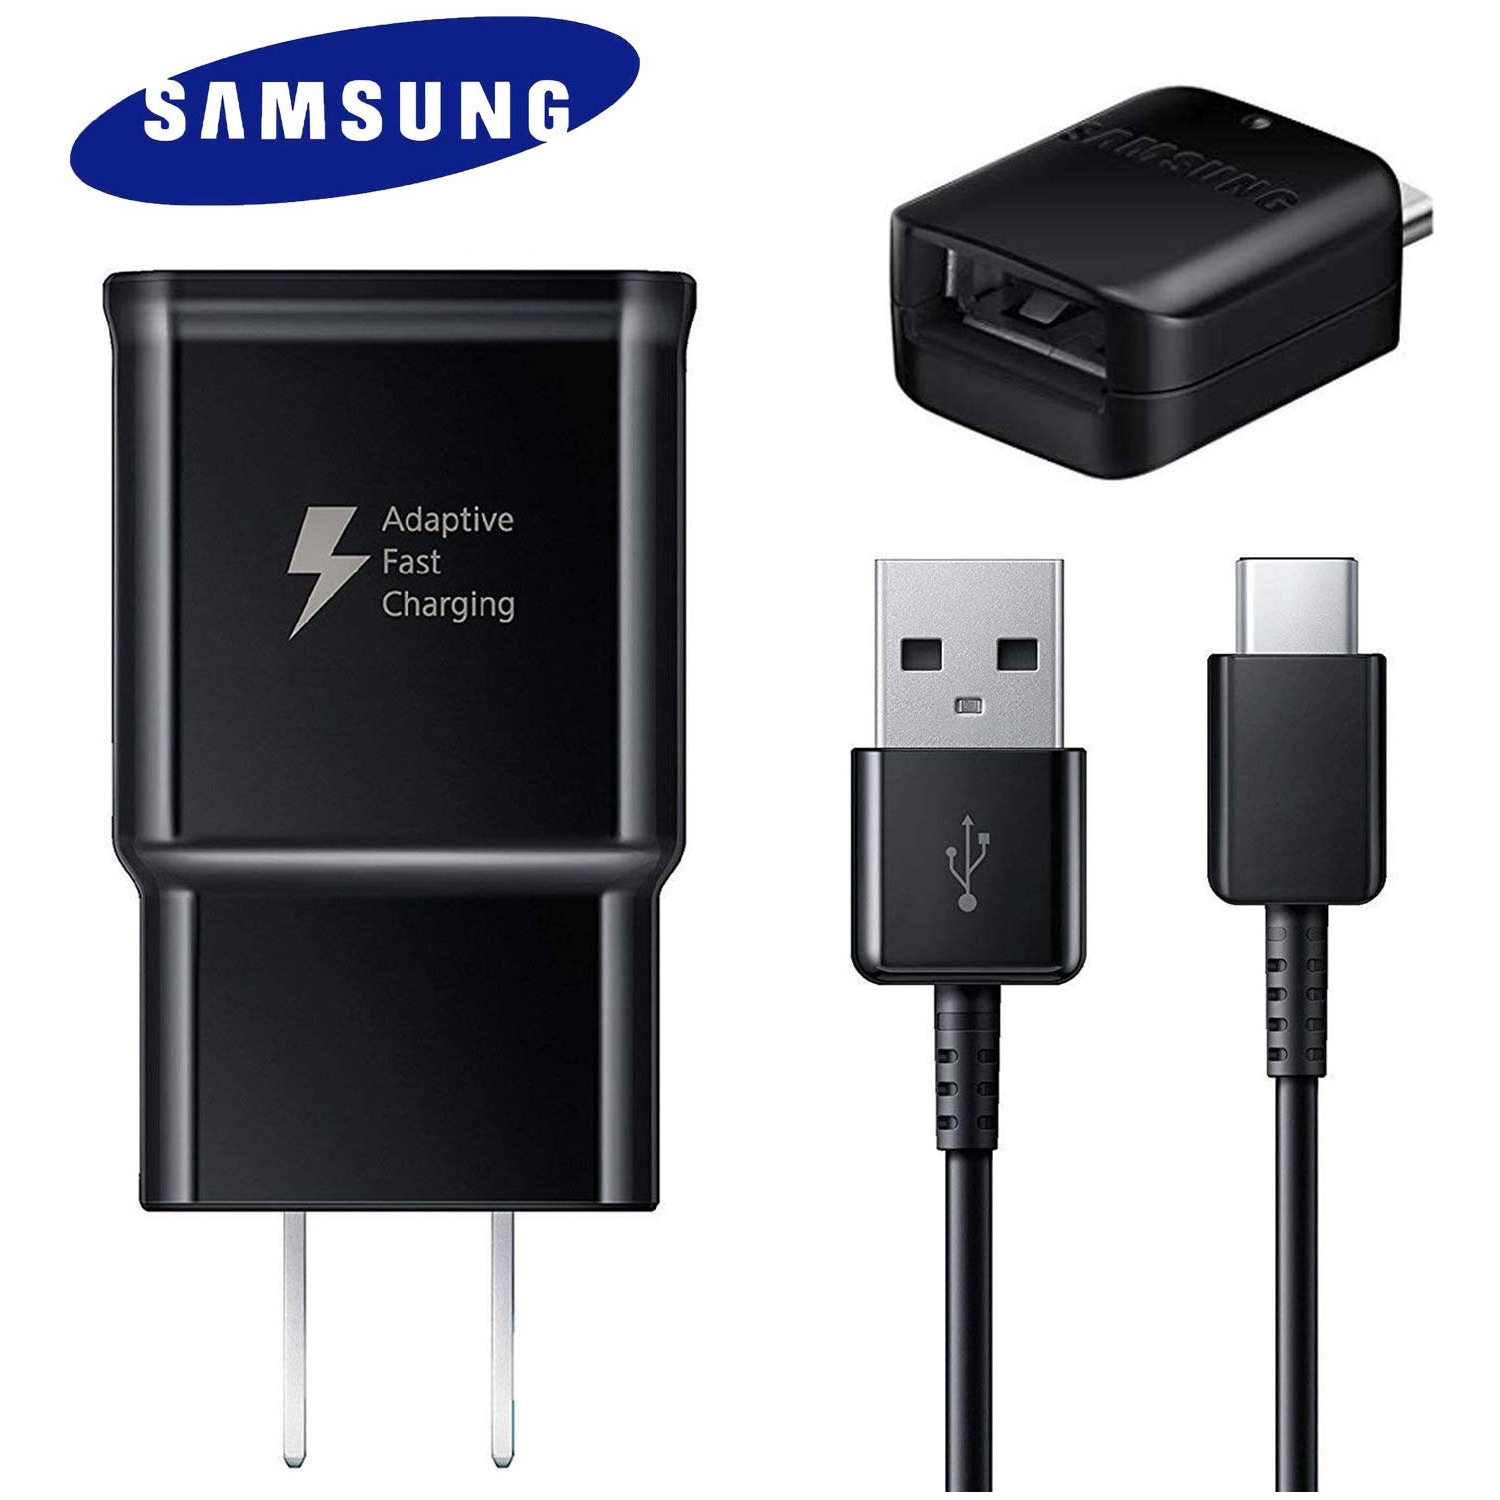 Samsung Fast Adaptive Wall Charger for Galaxy S9 Note 9 S8 + EP-TA20JBE - Type C Cable and OTG Adapter – Black